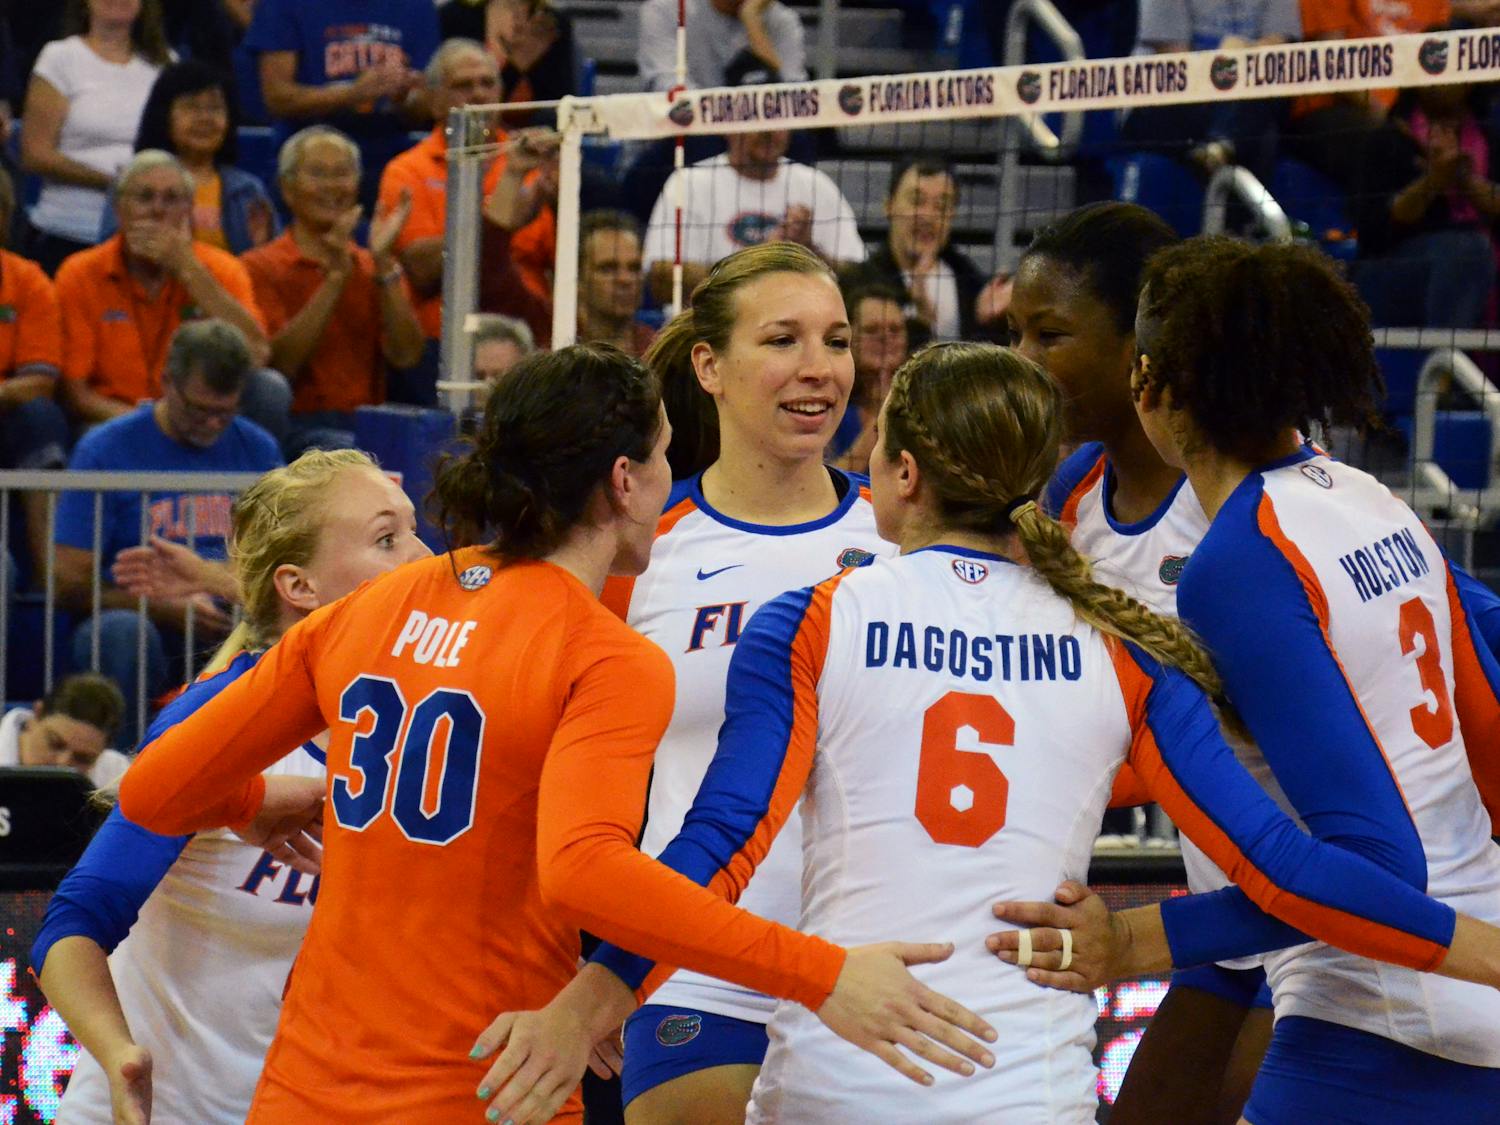 UF players celebrate after a point during Florida's 3-0 win against Missouri on Friday in the O'Connell Center.